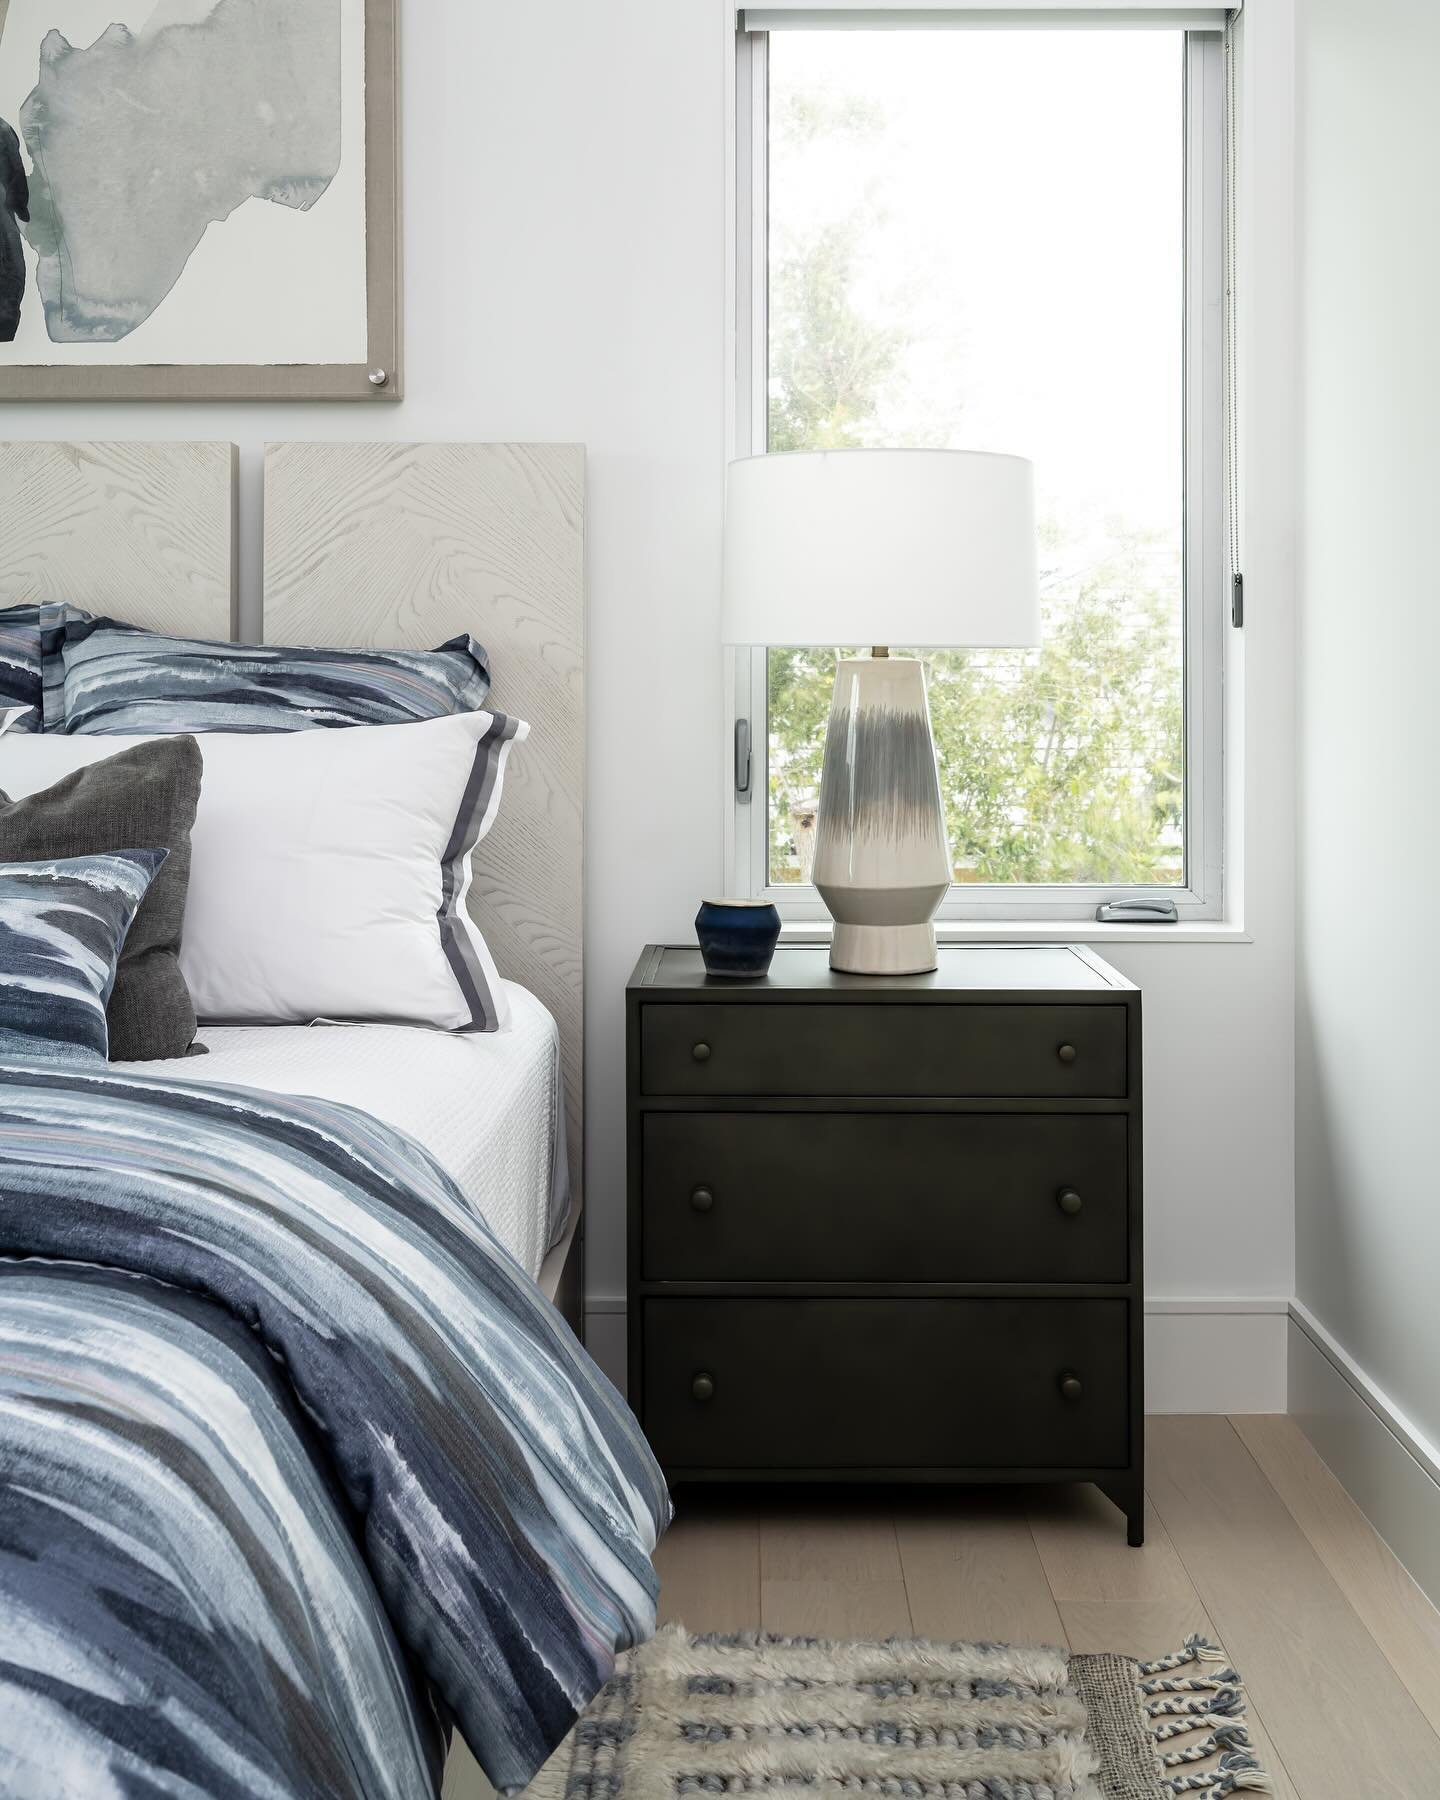 This Guest Bedroom is designed to create a captivating and inviting atmosphere. Cool blue tones are strategically incorporated to uplift the space, making it a serene and welcoming place to relax and unwind.

Project: By The Bay
Designers: @emcyinter